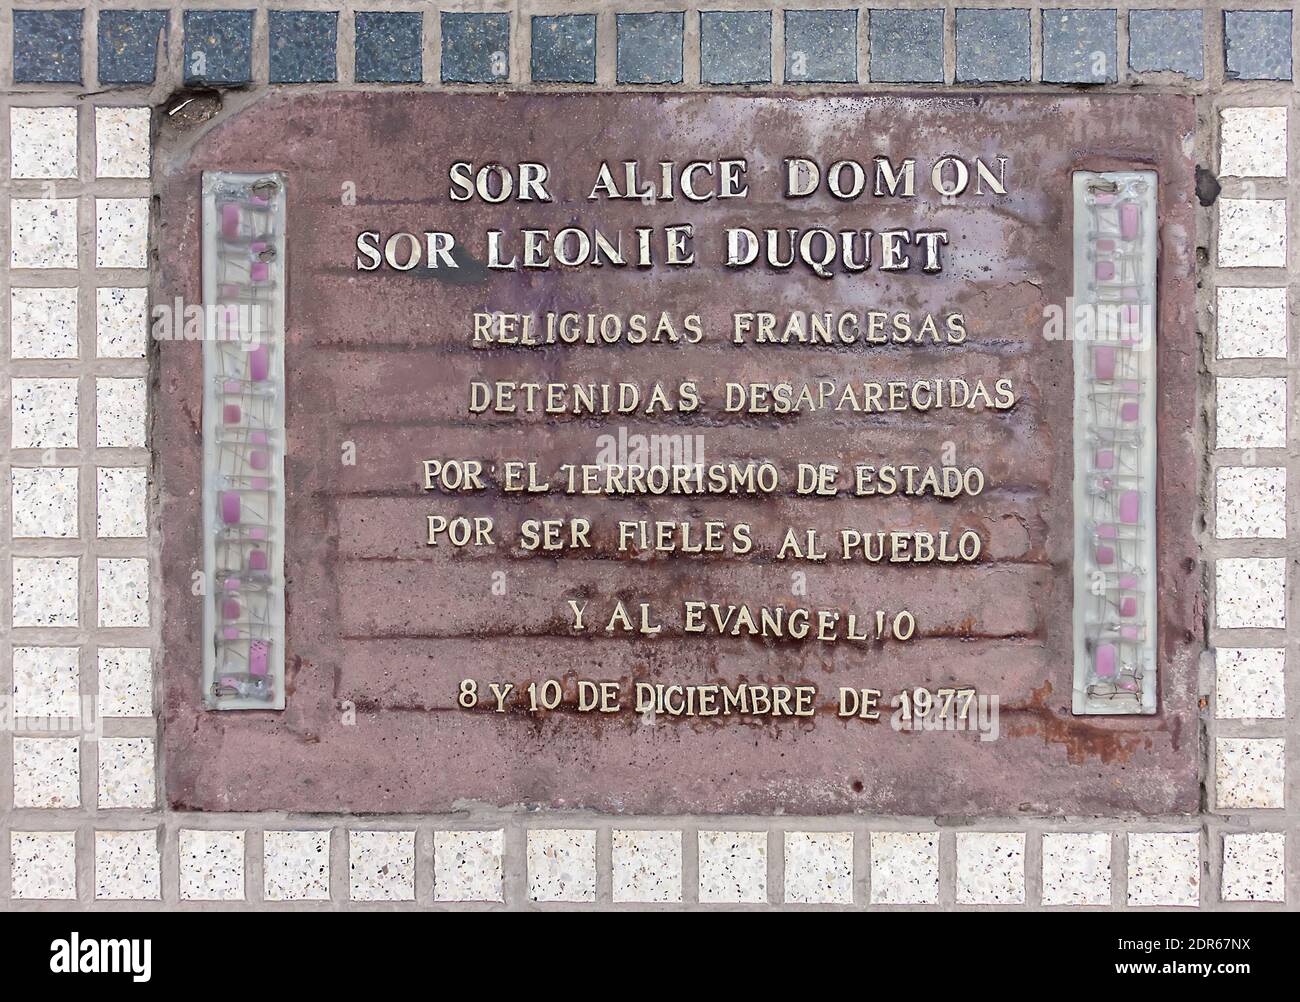 Plaque Buenos Aires, Argentina in homage to Sisters Alice Bomon and Leonie Duquet French nuns kidnapped and disappeared by Argentine State terrorism Stock Photo